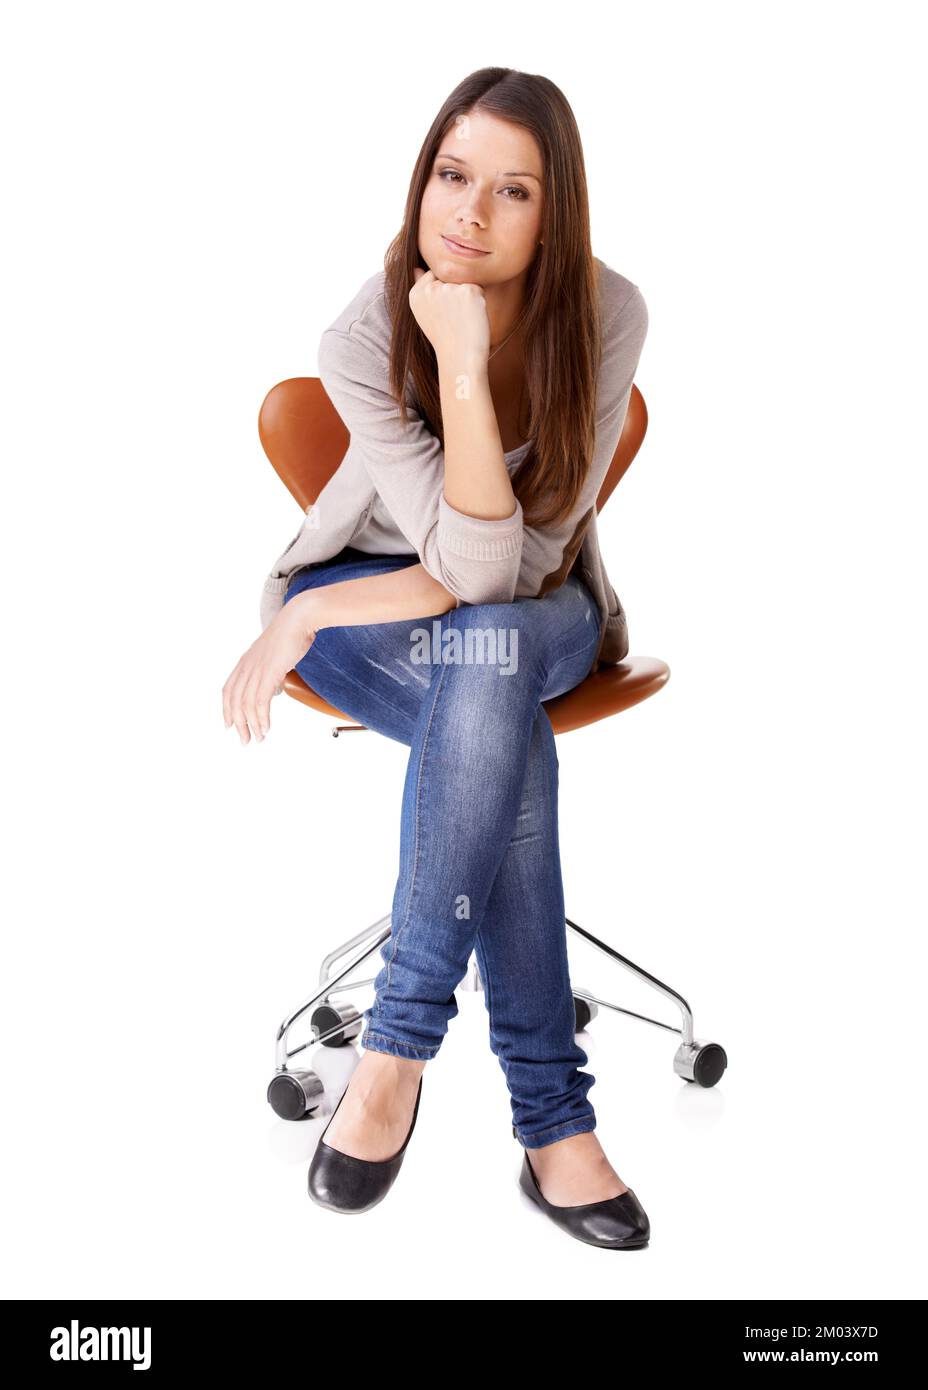 Shes got a thoughtful side. Studio shot of a beautiful young woman sitting on a chair against a white background. Stock Photo